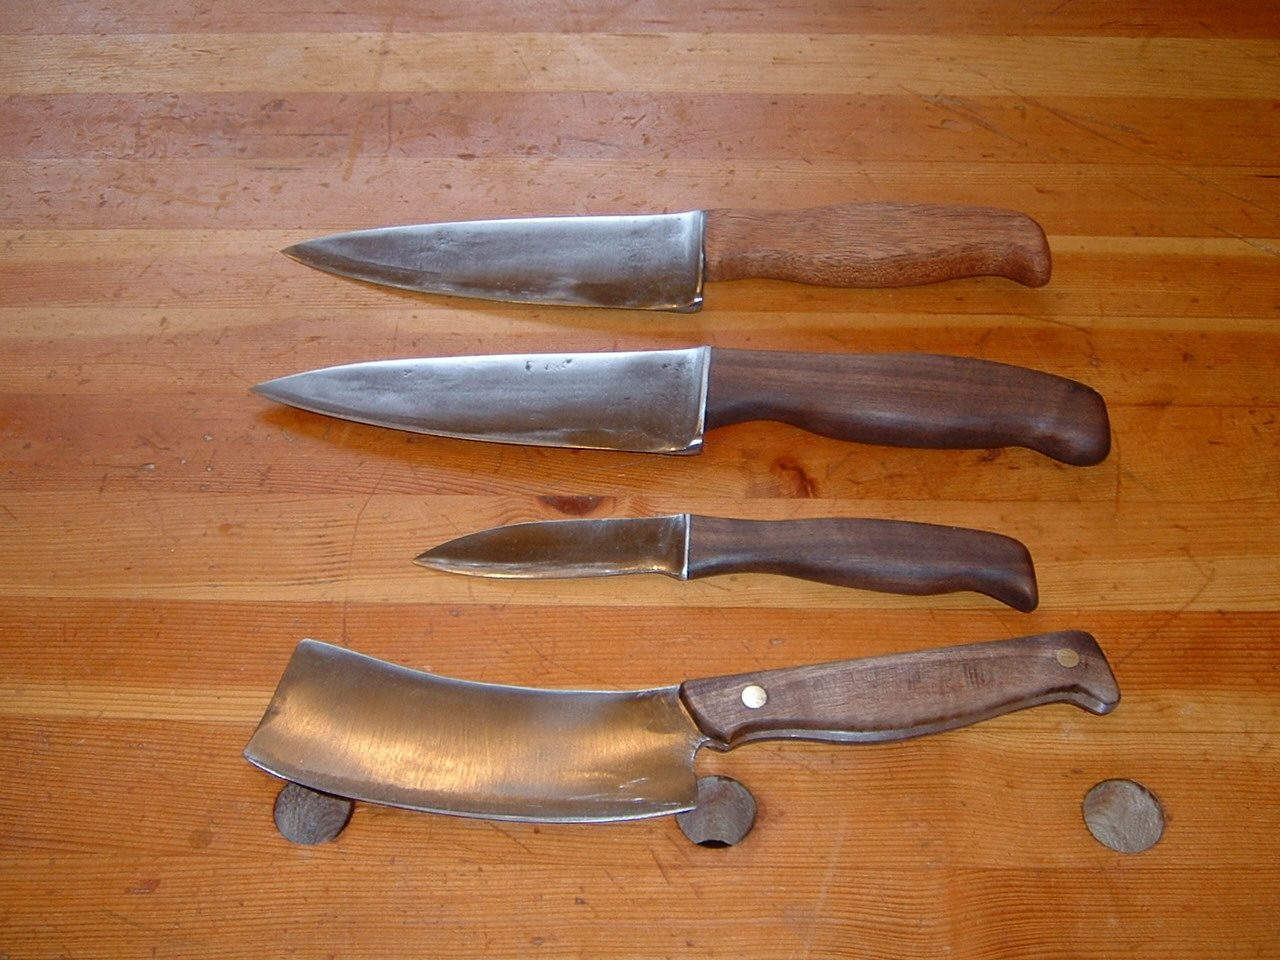 knives_007 - Member Galleries - I Forge Iron